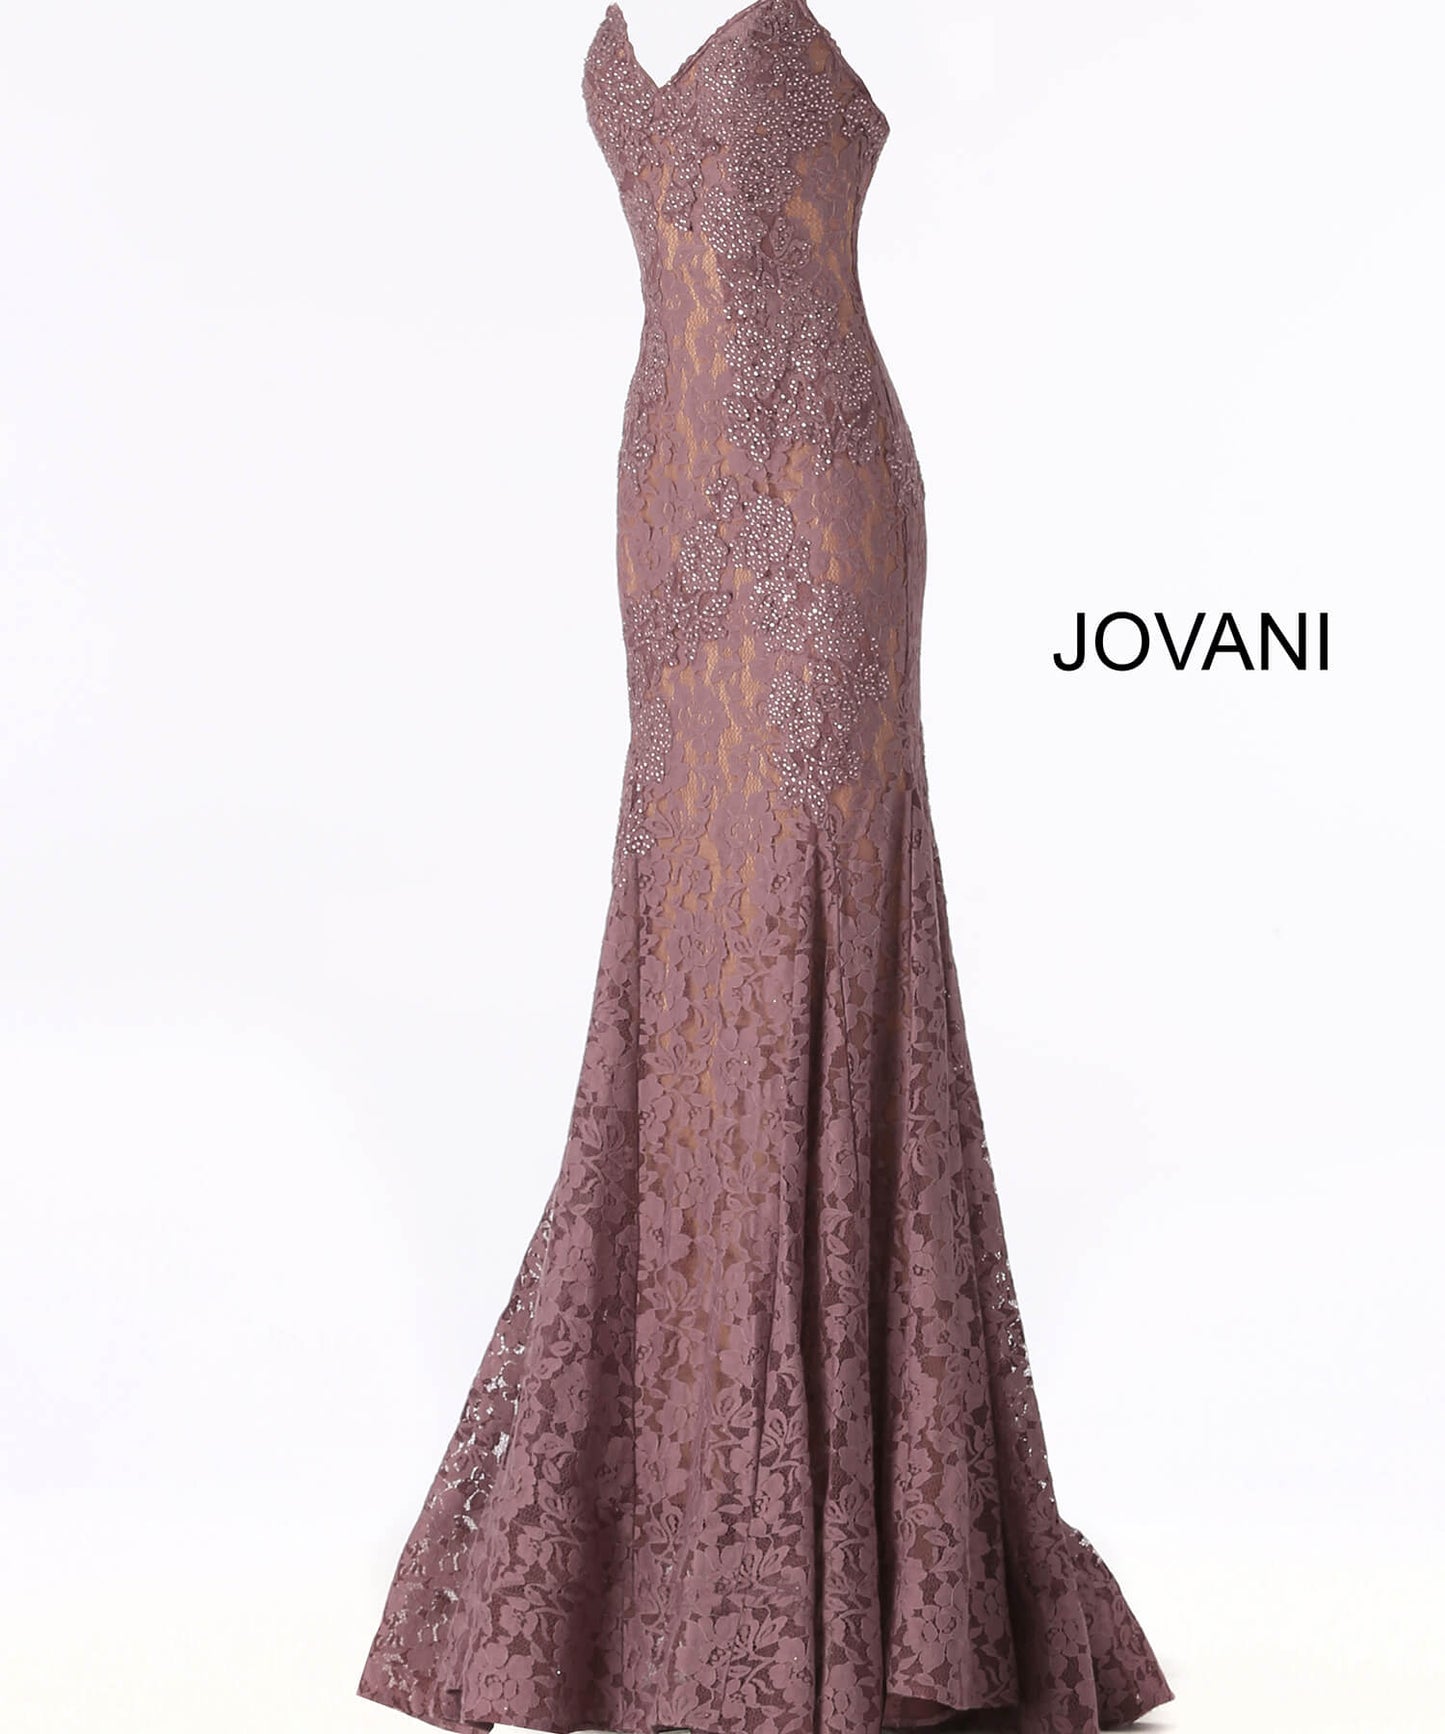 Jovani 37334 This beautiful, fitted, strapless lace dress features a sweetheart neckline. The top half of the trumpet dress is accessorized with rhinestones. Stretch nude lining with stretch lace overlay, heat set stones, form fitting, strapless. Available Sizes: 00,0,2,4,6,8,10,12,14,16,18,20,22,24  Available Colors: BLACK, BRIGHT PINK, DUSTY PINK, EMERALD, FUCHSIA, IVORY, LIGHT-BLUE, LILAC, MAUVE, NAVY, PERRIWINKLE, RED, ROYAL